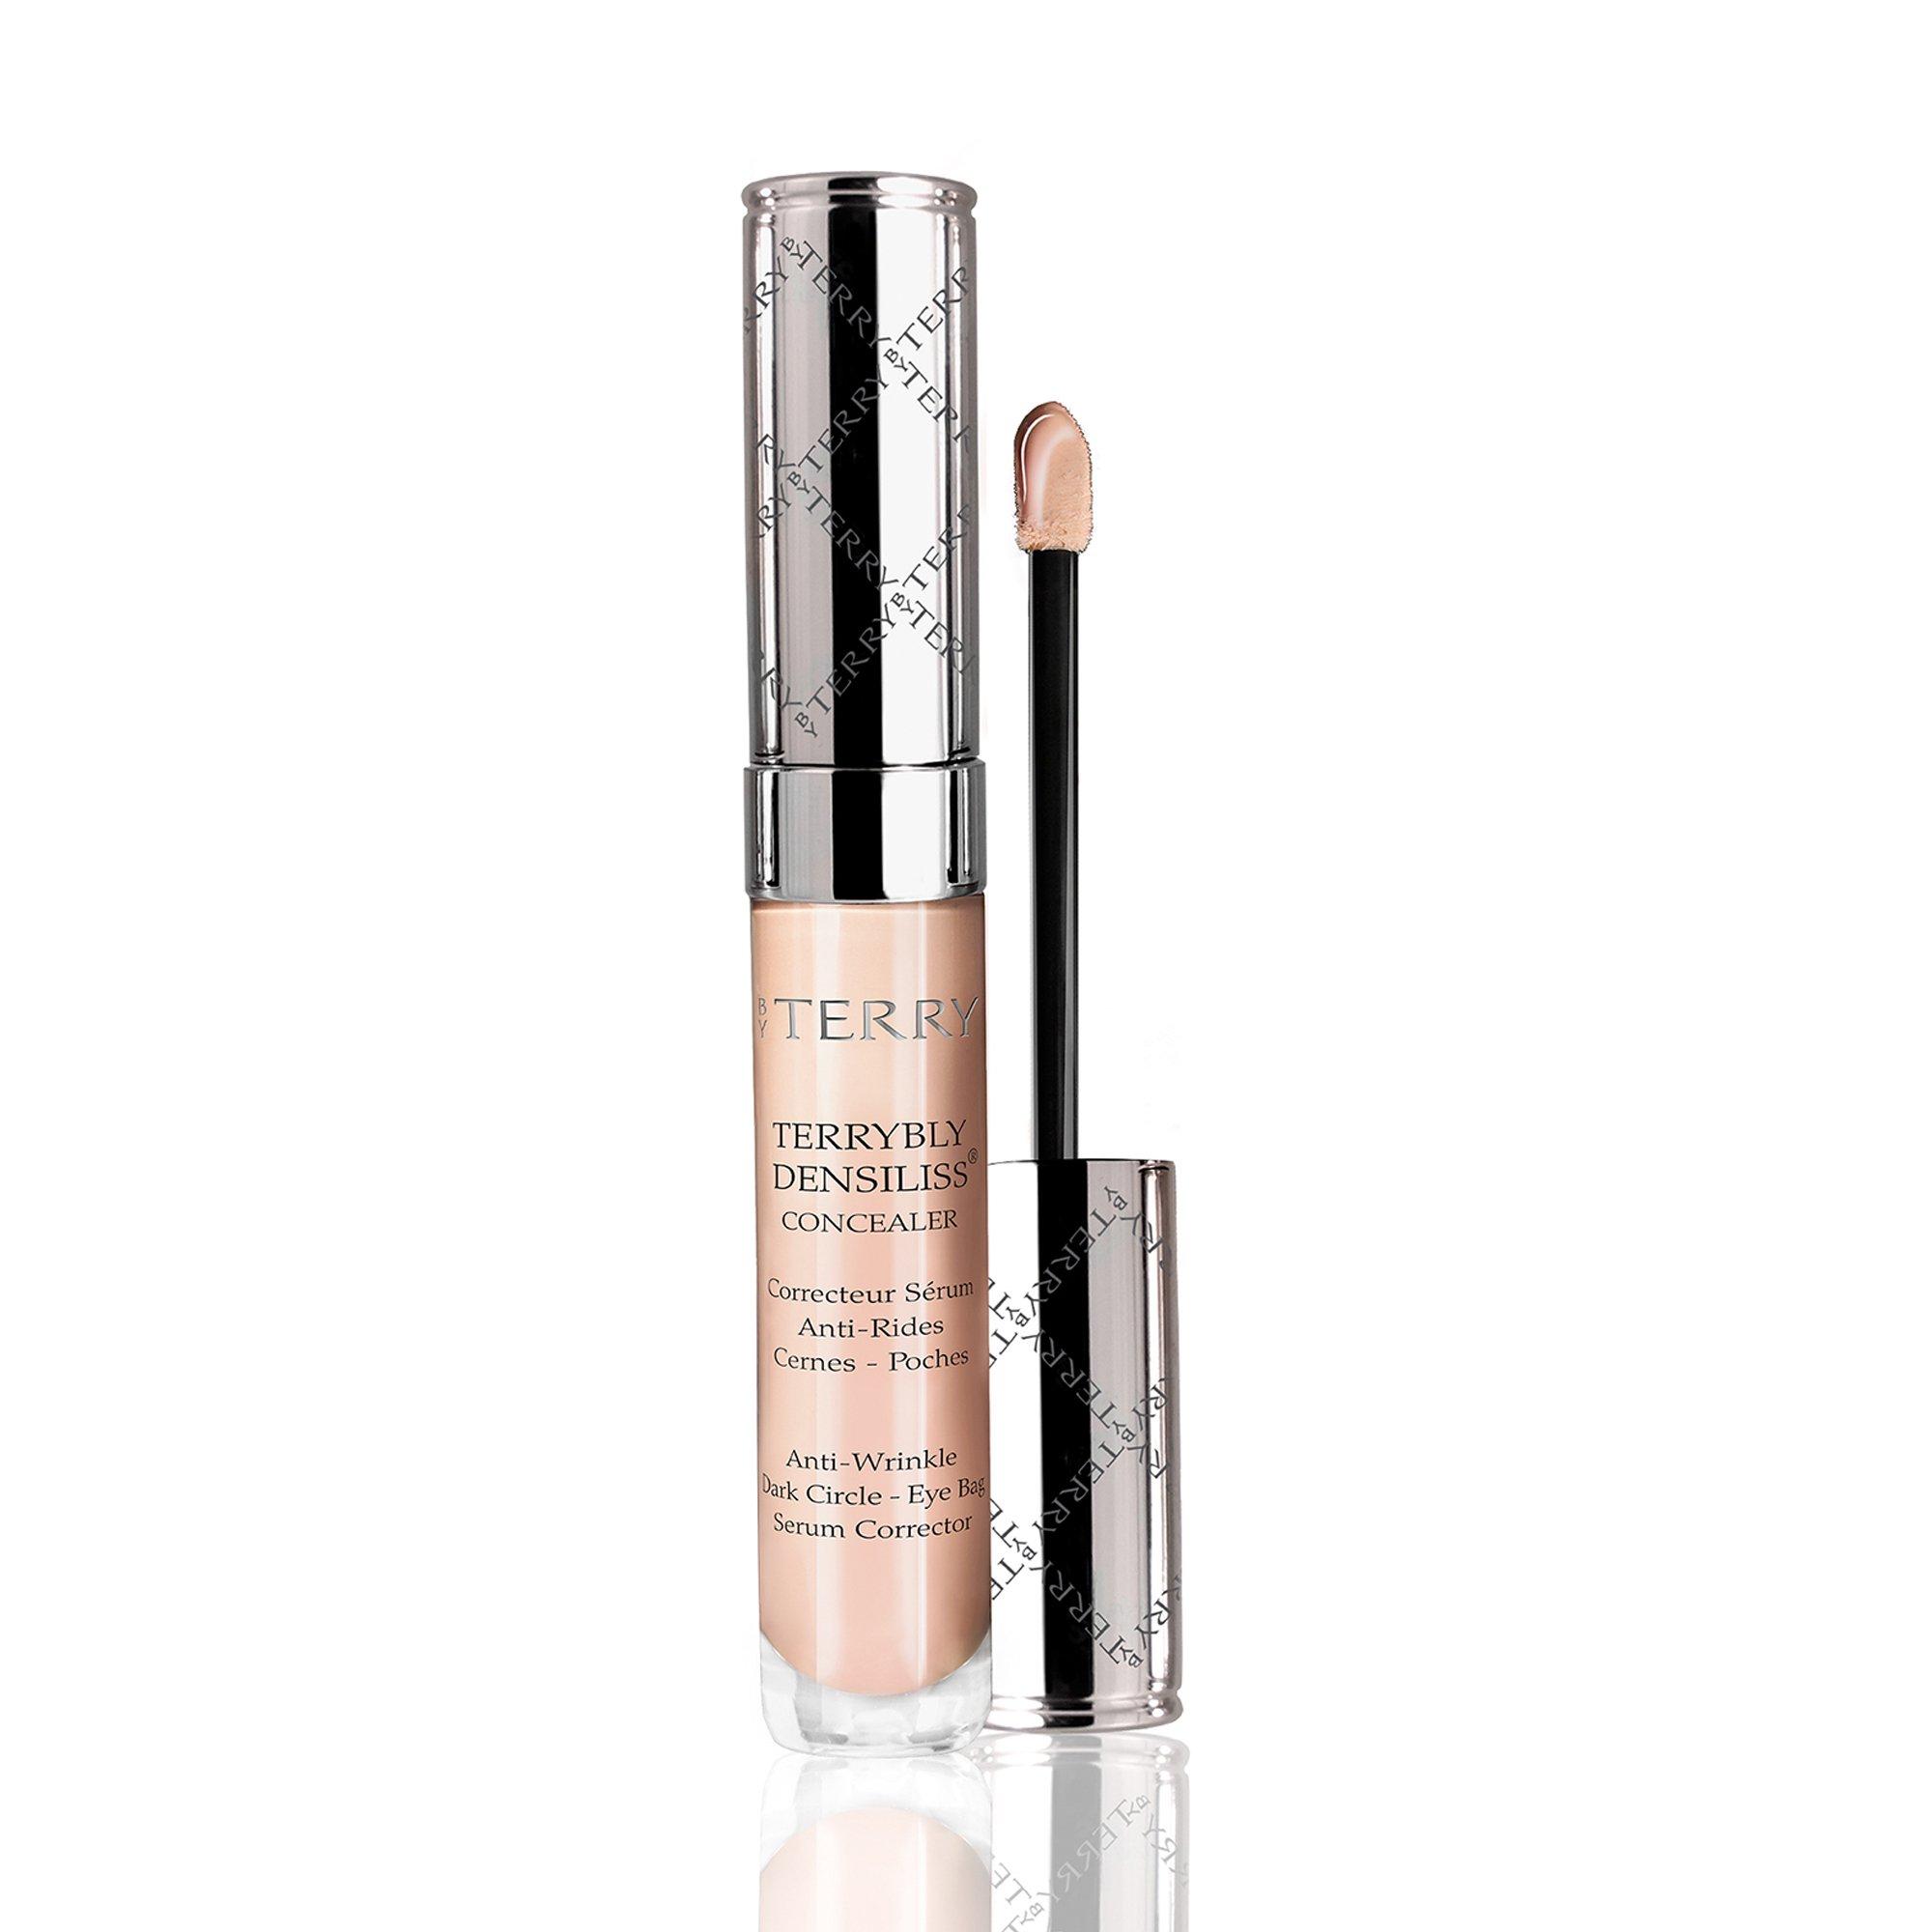 Image of BY TERRY Terrybly Densiliss Concealer - 7ml